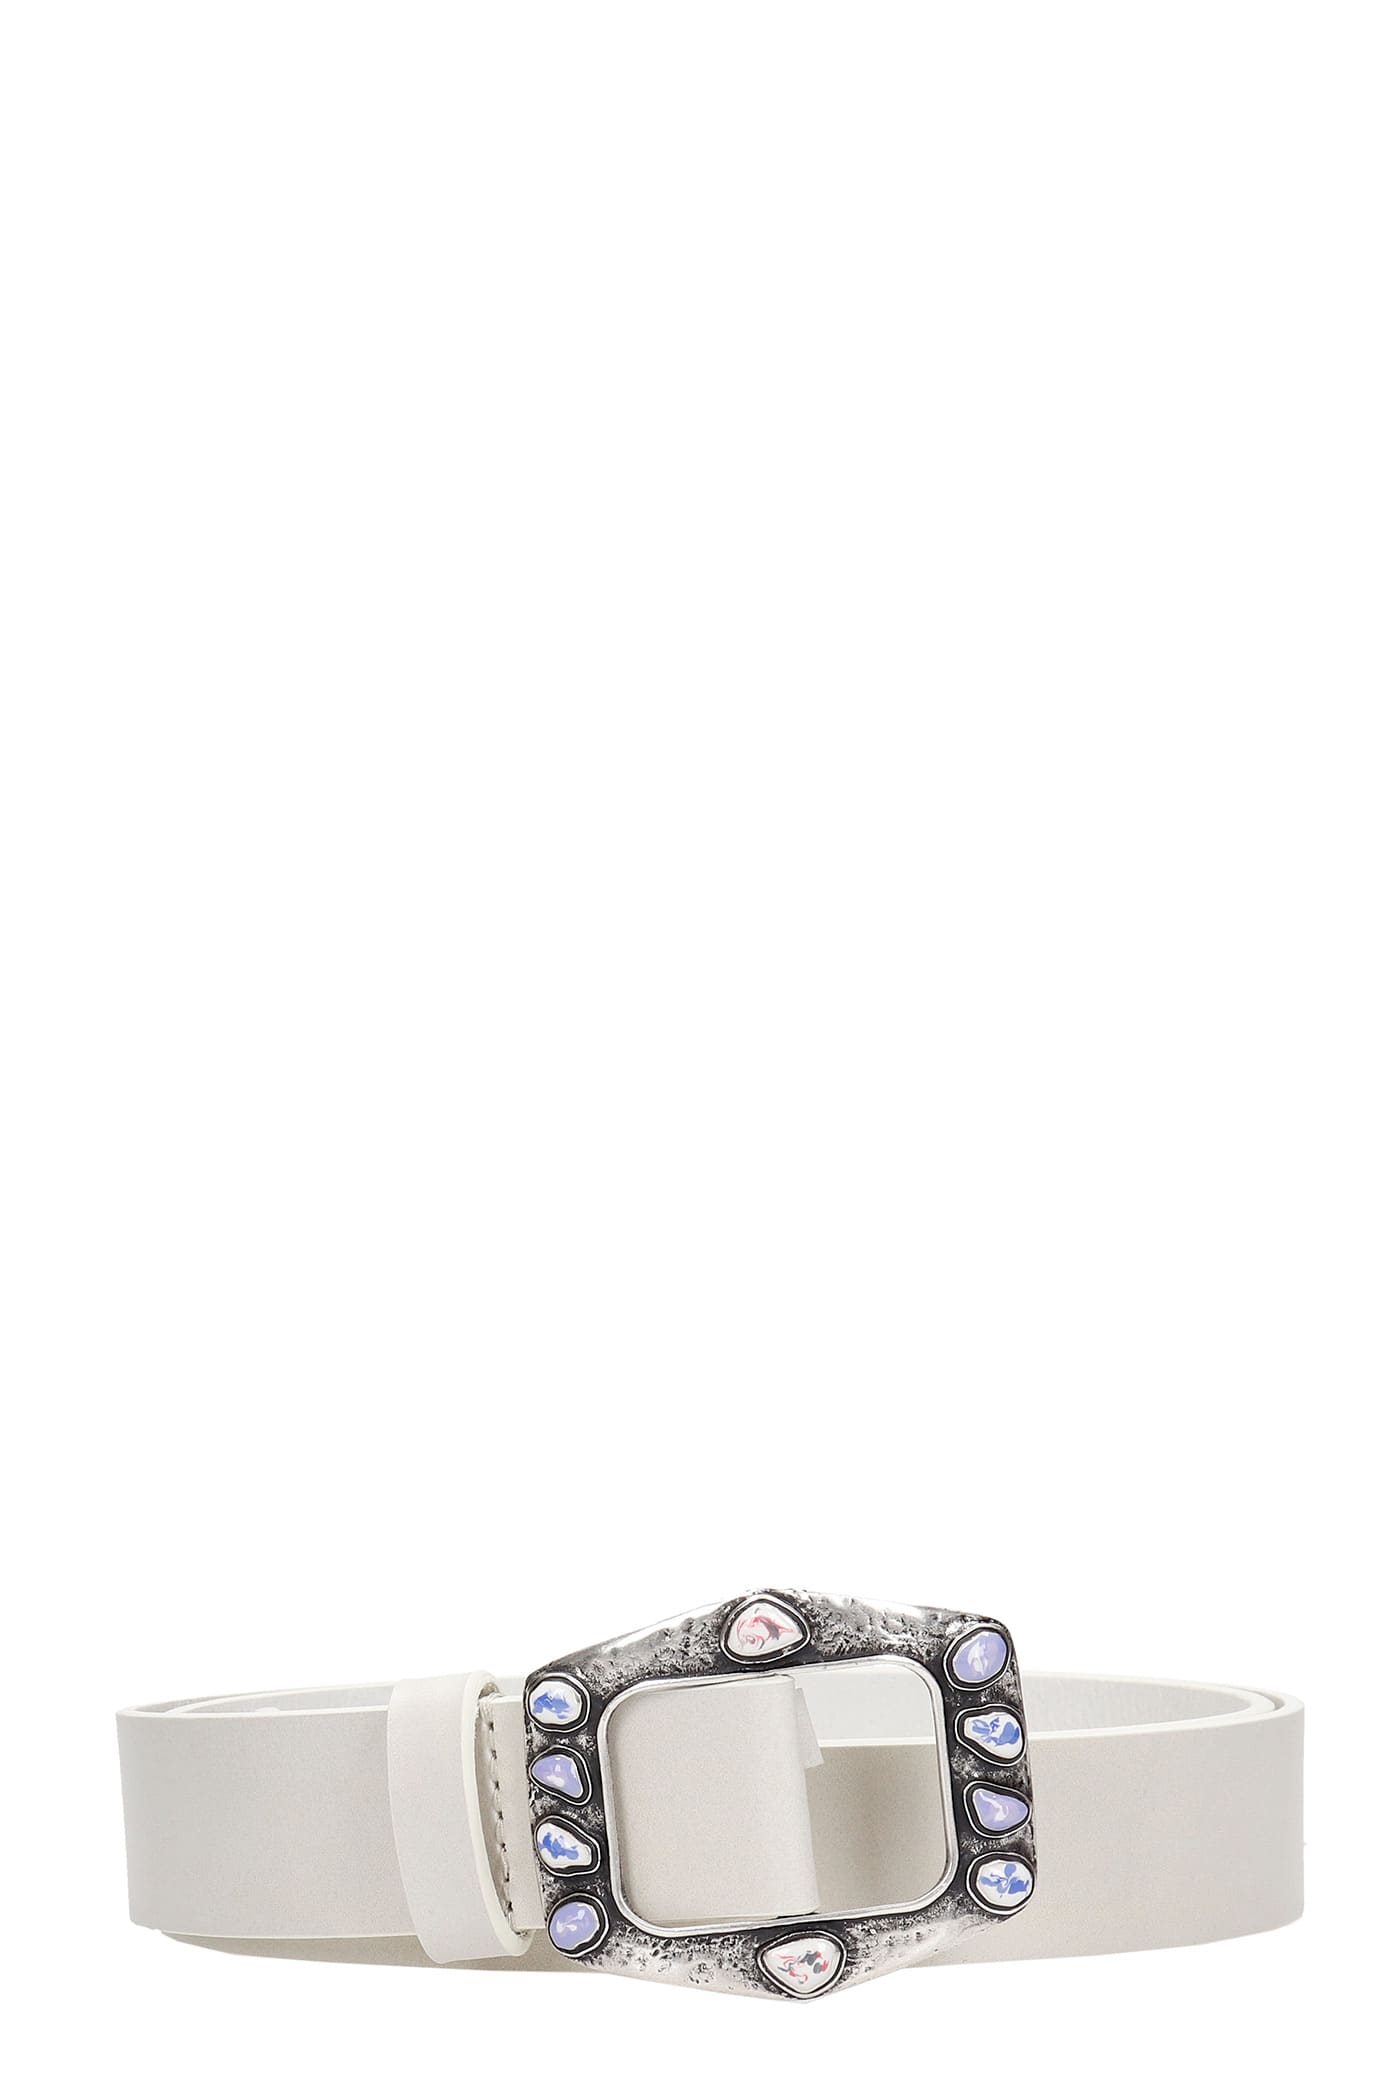 Isabel Marant Tikei Belts In White Leather